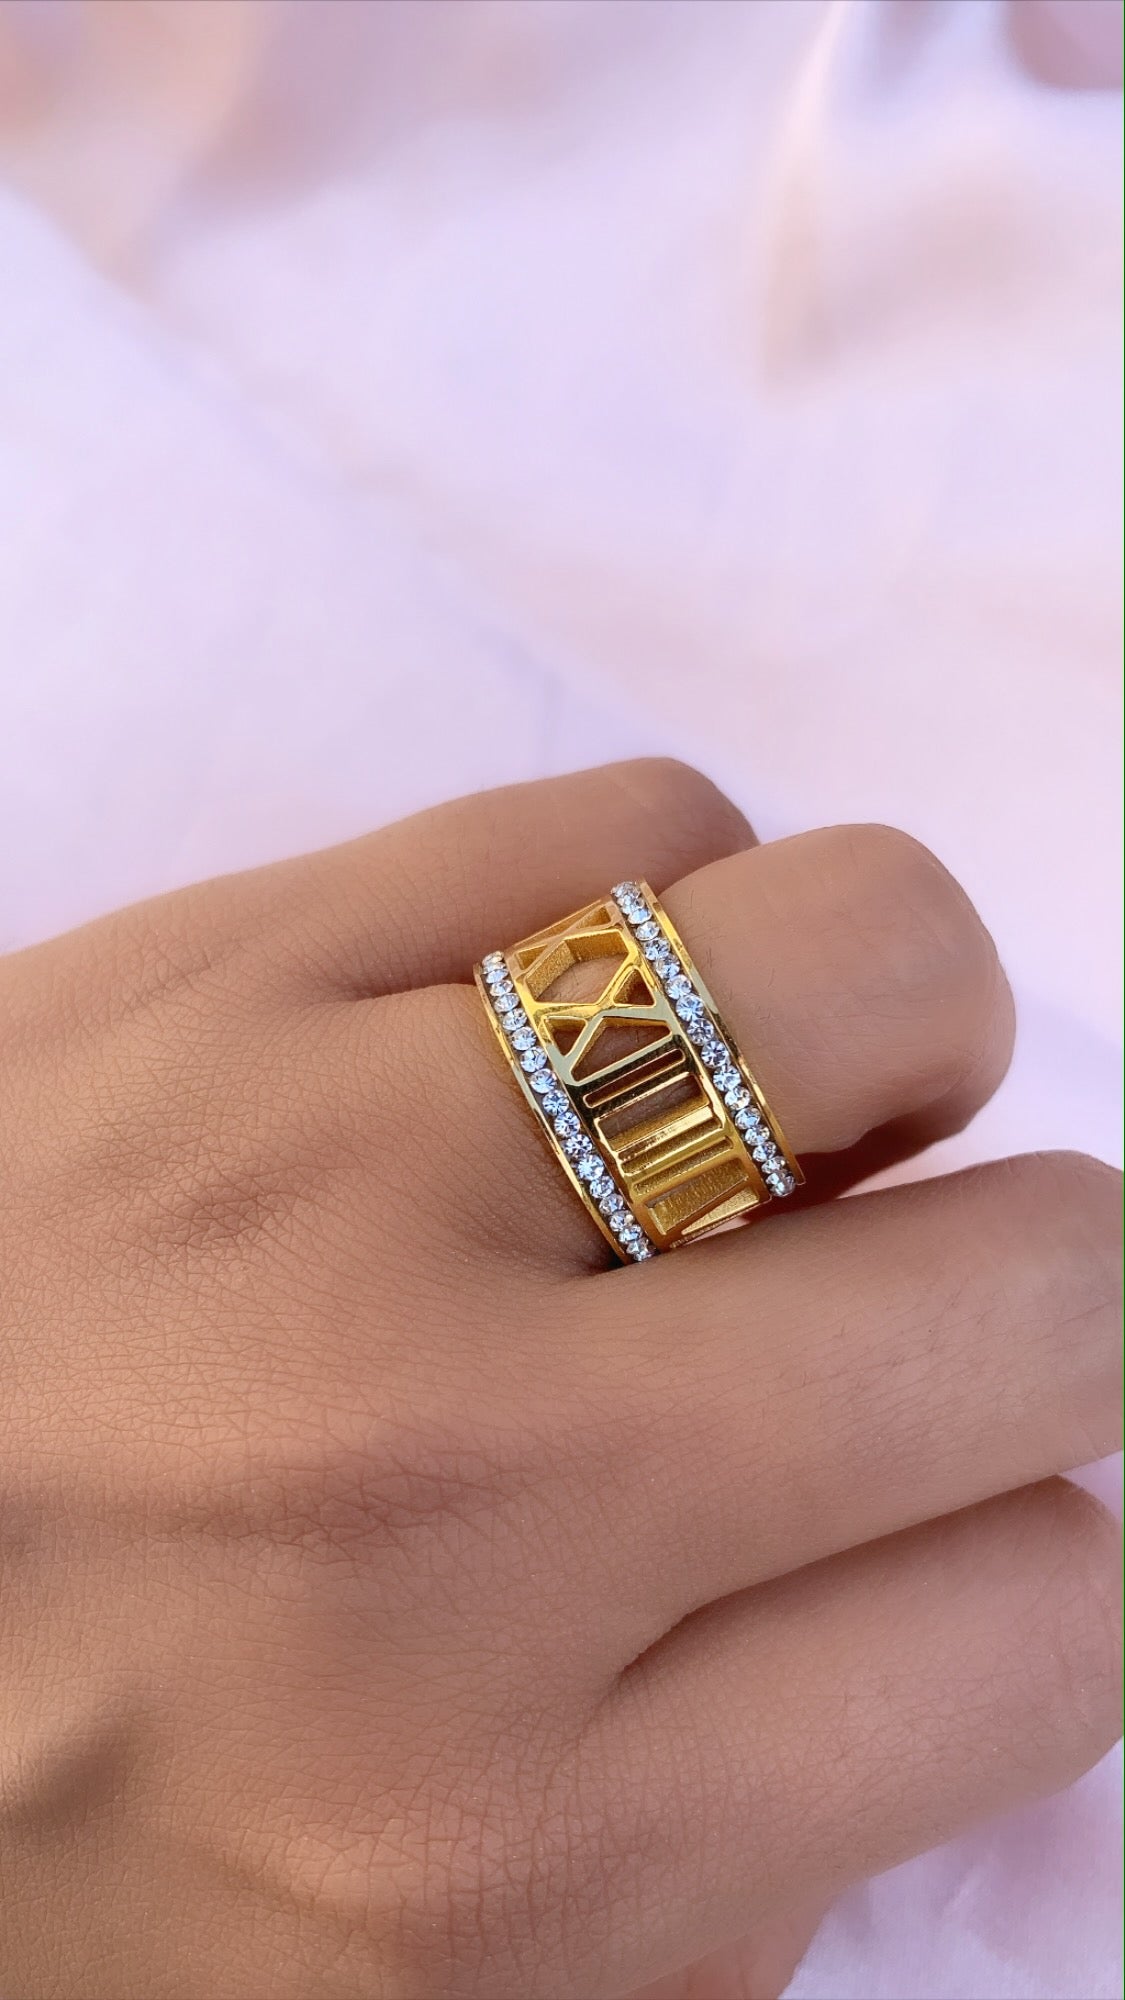 Numeral ring 4